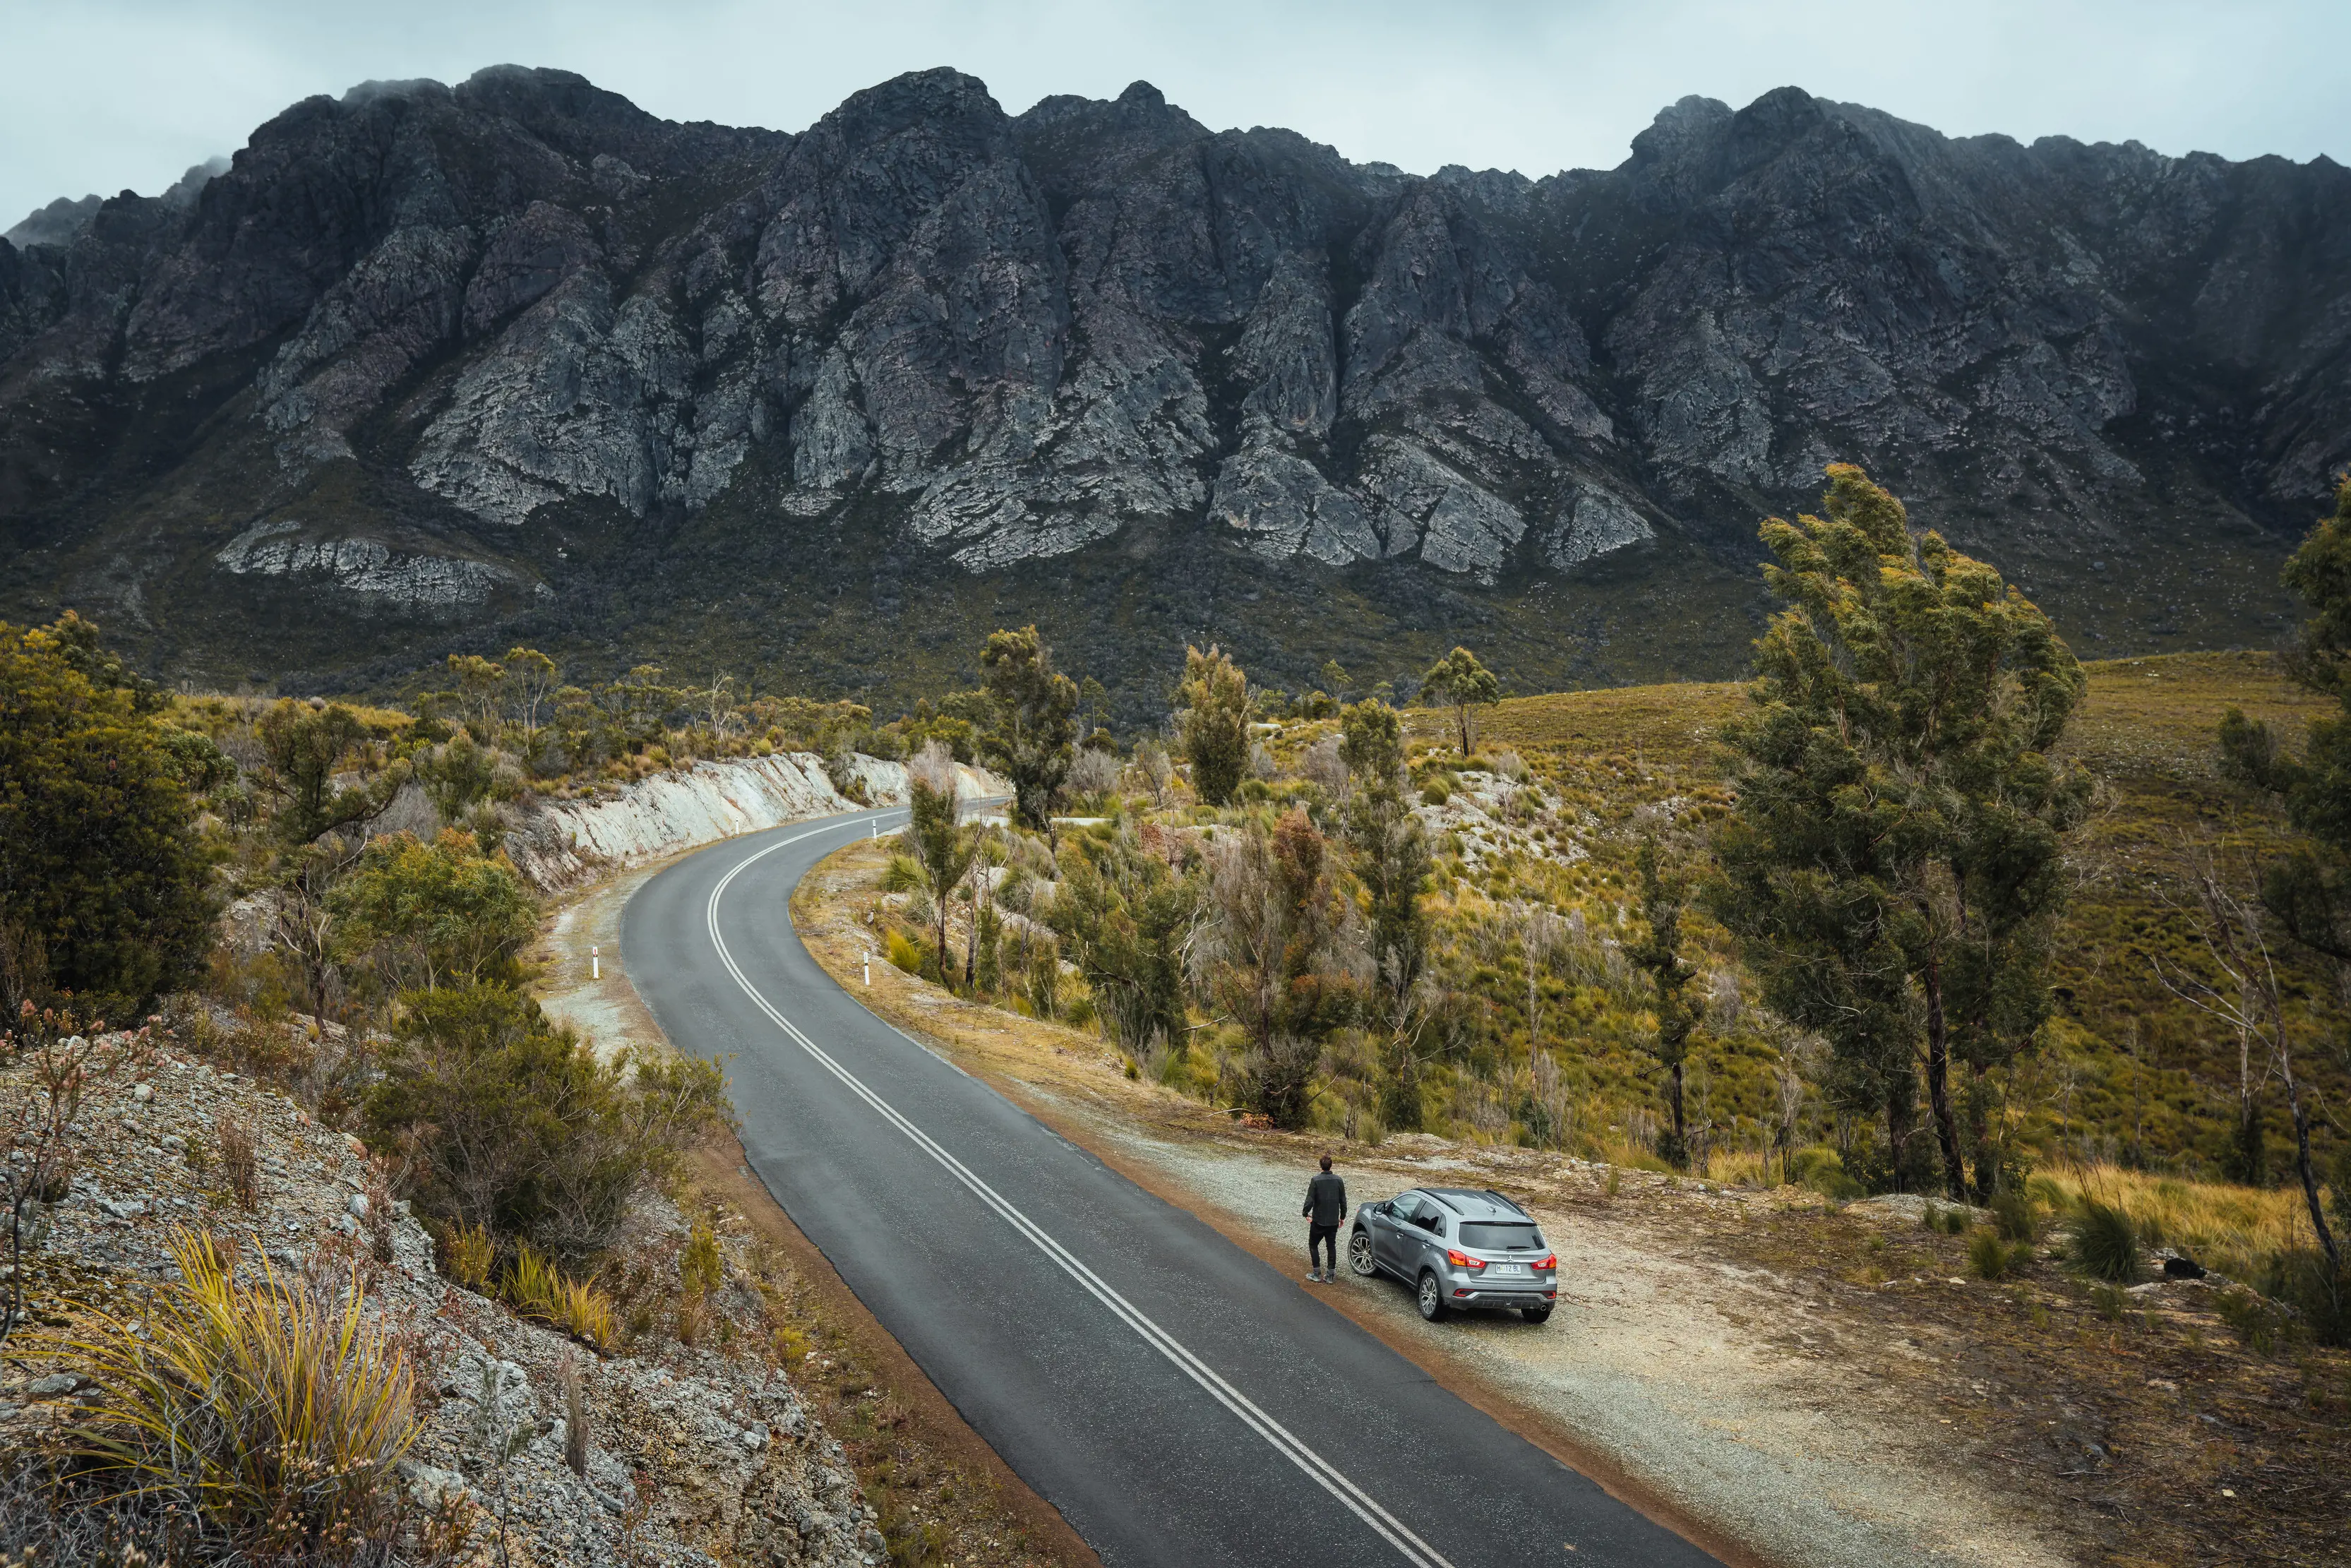 A traveller parks up and admires the views whilst on the road to Sentinel Range, a quartzite mountain range.